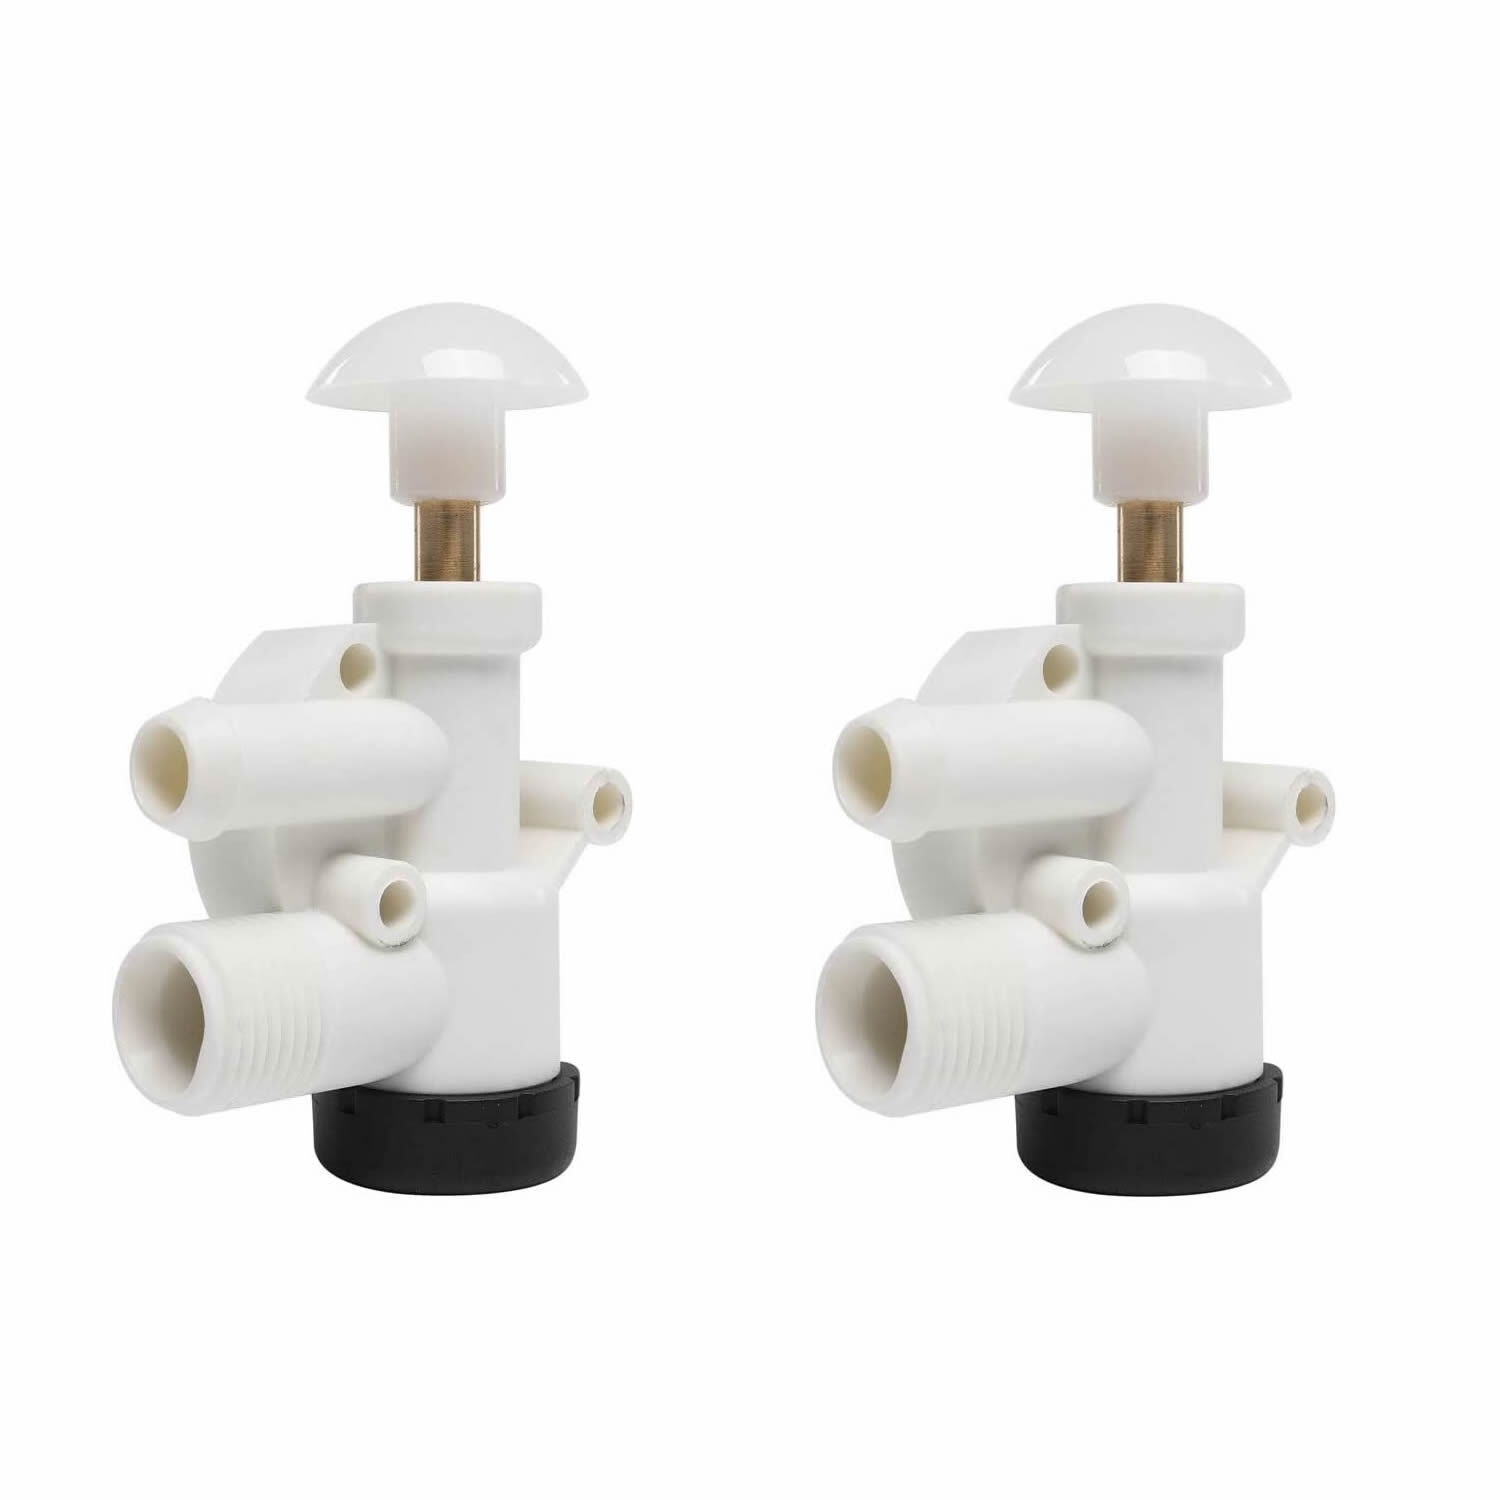 RV Upgraded Toilet Water Valve Assembly 385314349 For Dometic Sealand - 2 Packs